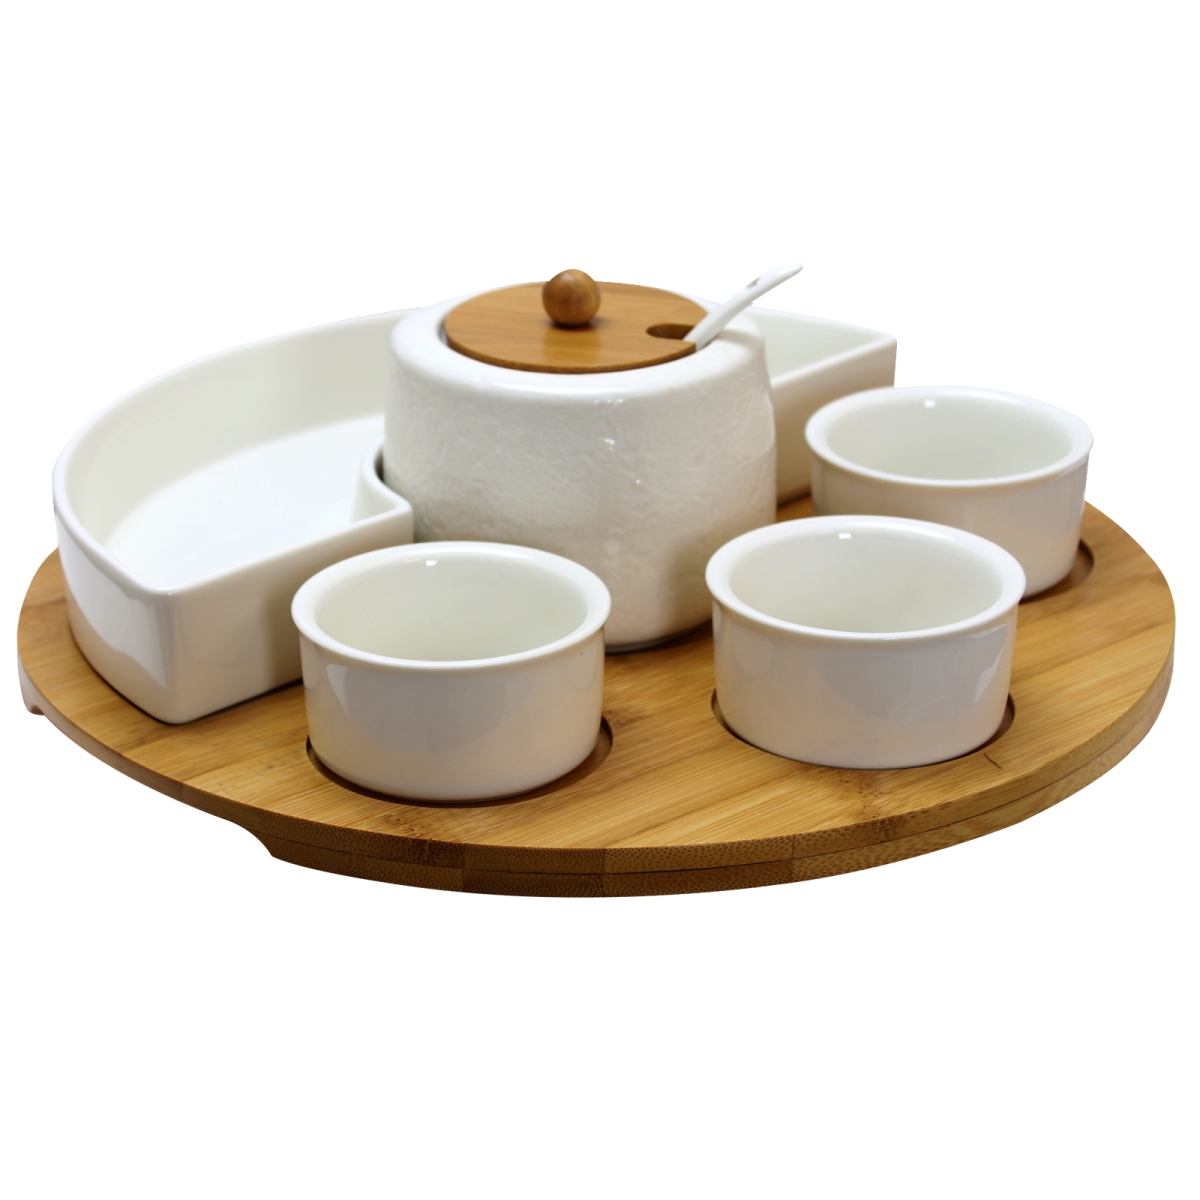 El-159 8 Piece Signature Appetizer Serving Set With 4 Serving Dishes, Center Condiment Server, Spoon & Bamboo Serving Tray